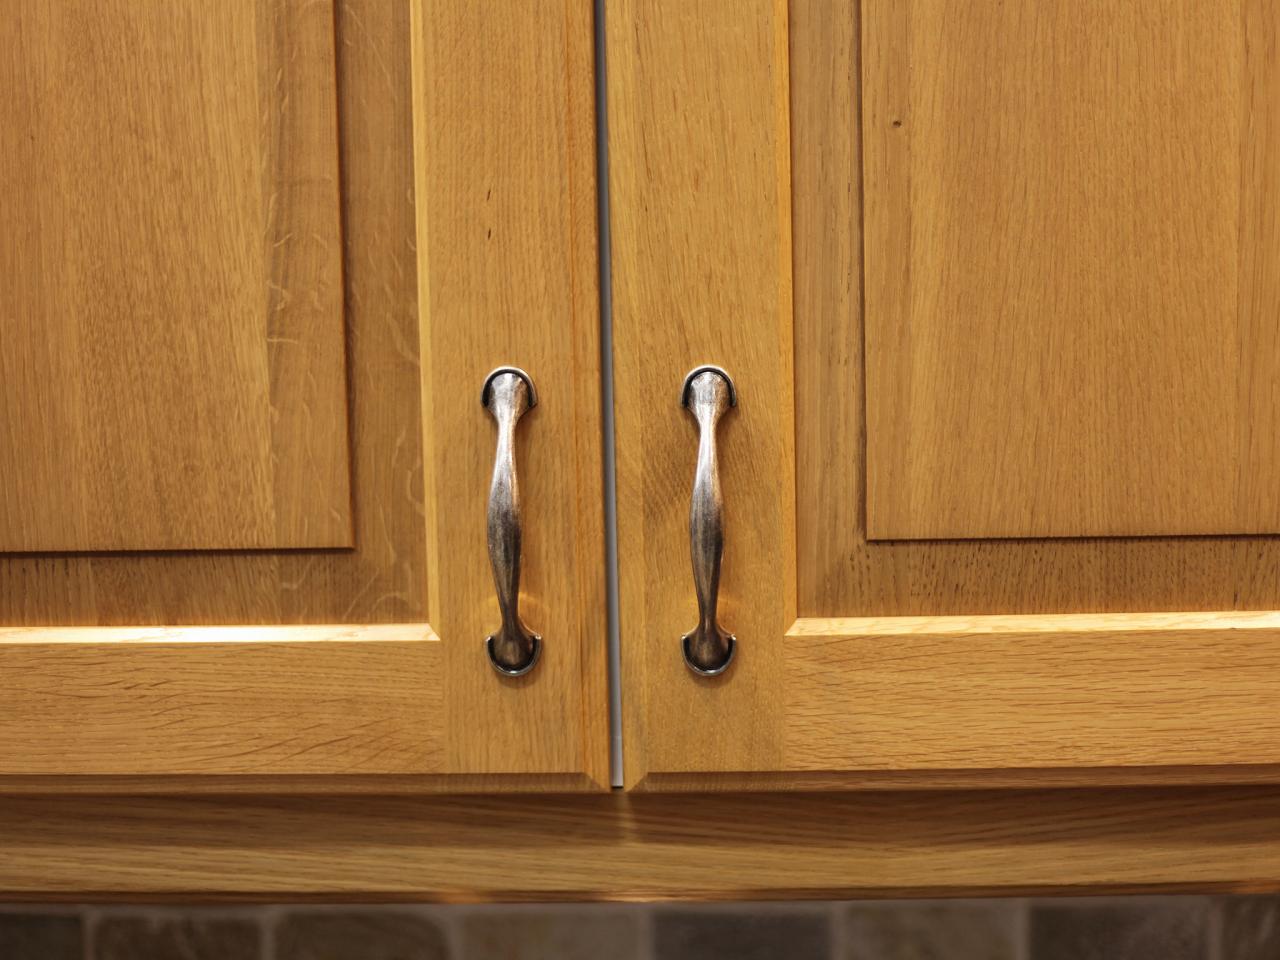 Kitchen Cabinet Handles Pictures, How To Install Door Knobs On Kitchen Cabinets